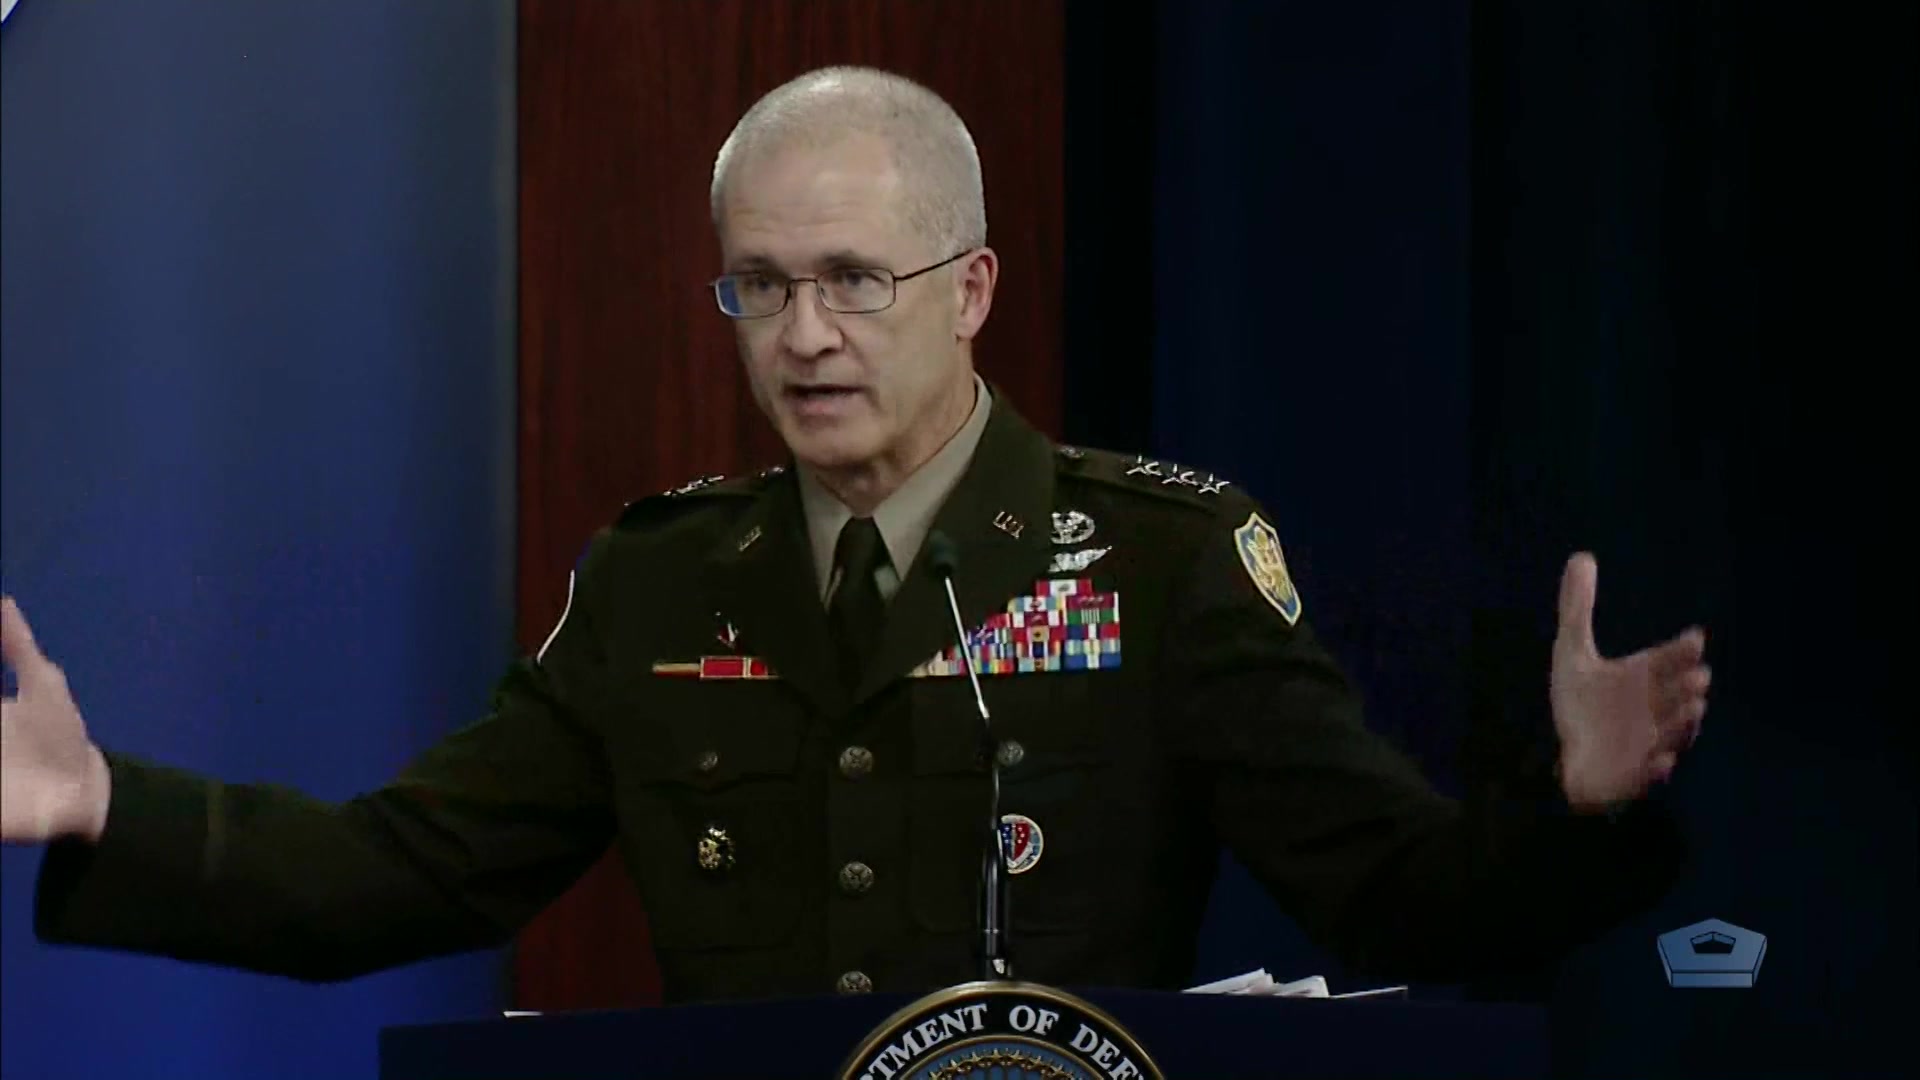 Dr. Terry Adirim, acting assistant defense secretary for health affairs, and Army Lt. Gen. Ronald J. Place, director of the Defense Health Agency, provide the latest COVID-19 updates from the Pentagon, May 20, 2021.